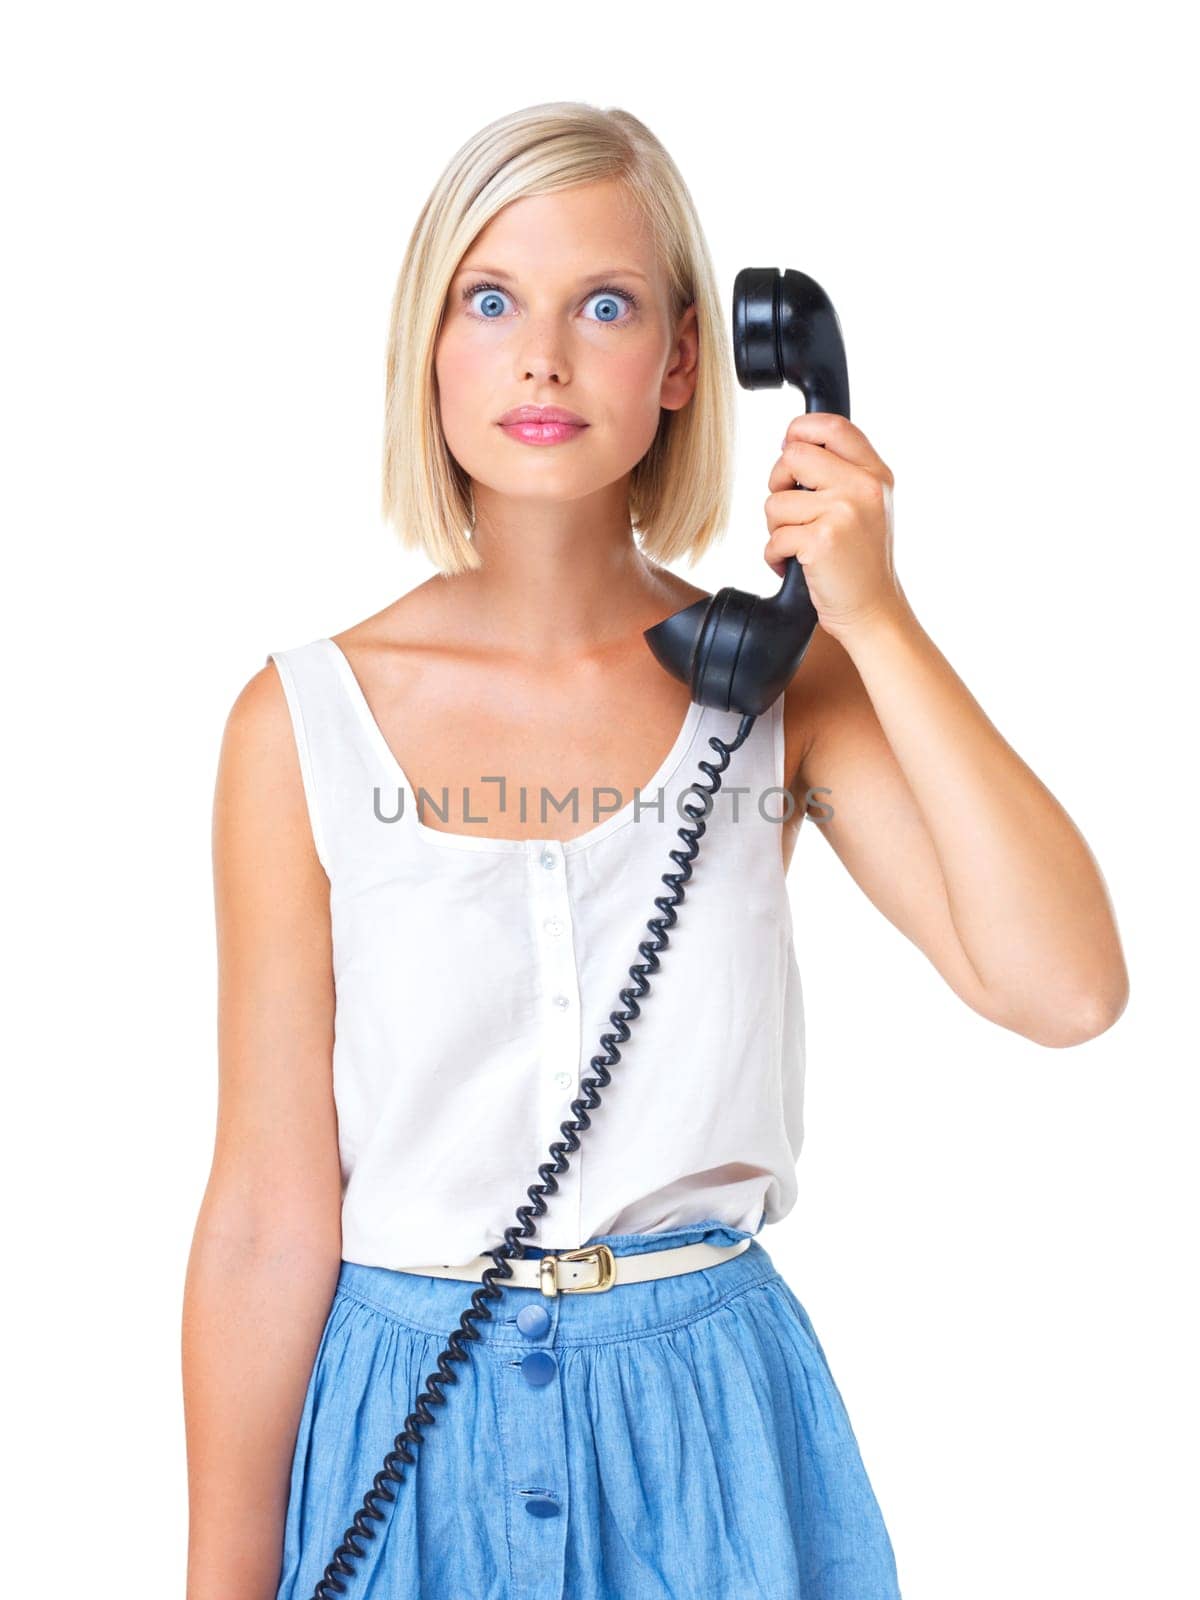 Woman, telephone call and surprise in portrait, shocked facial expression with communication isolated on white background. Wow, retro technology and young female with omg face, vintage and connection.